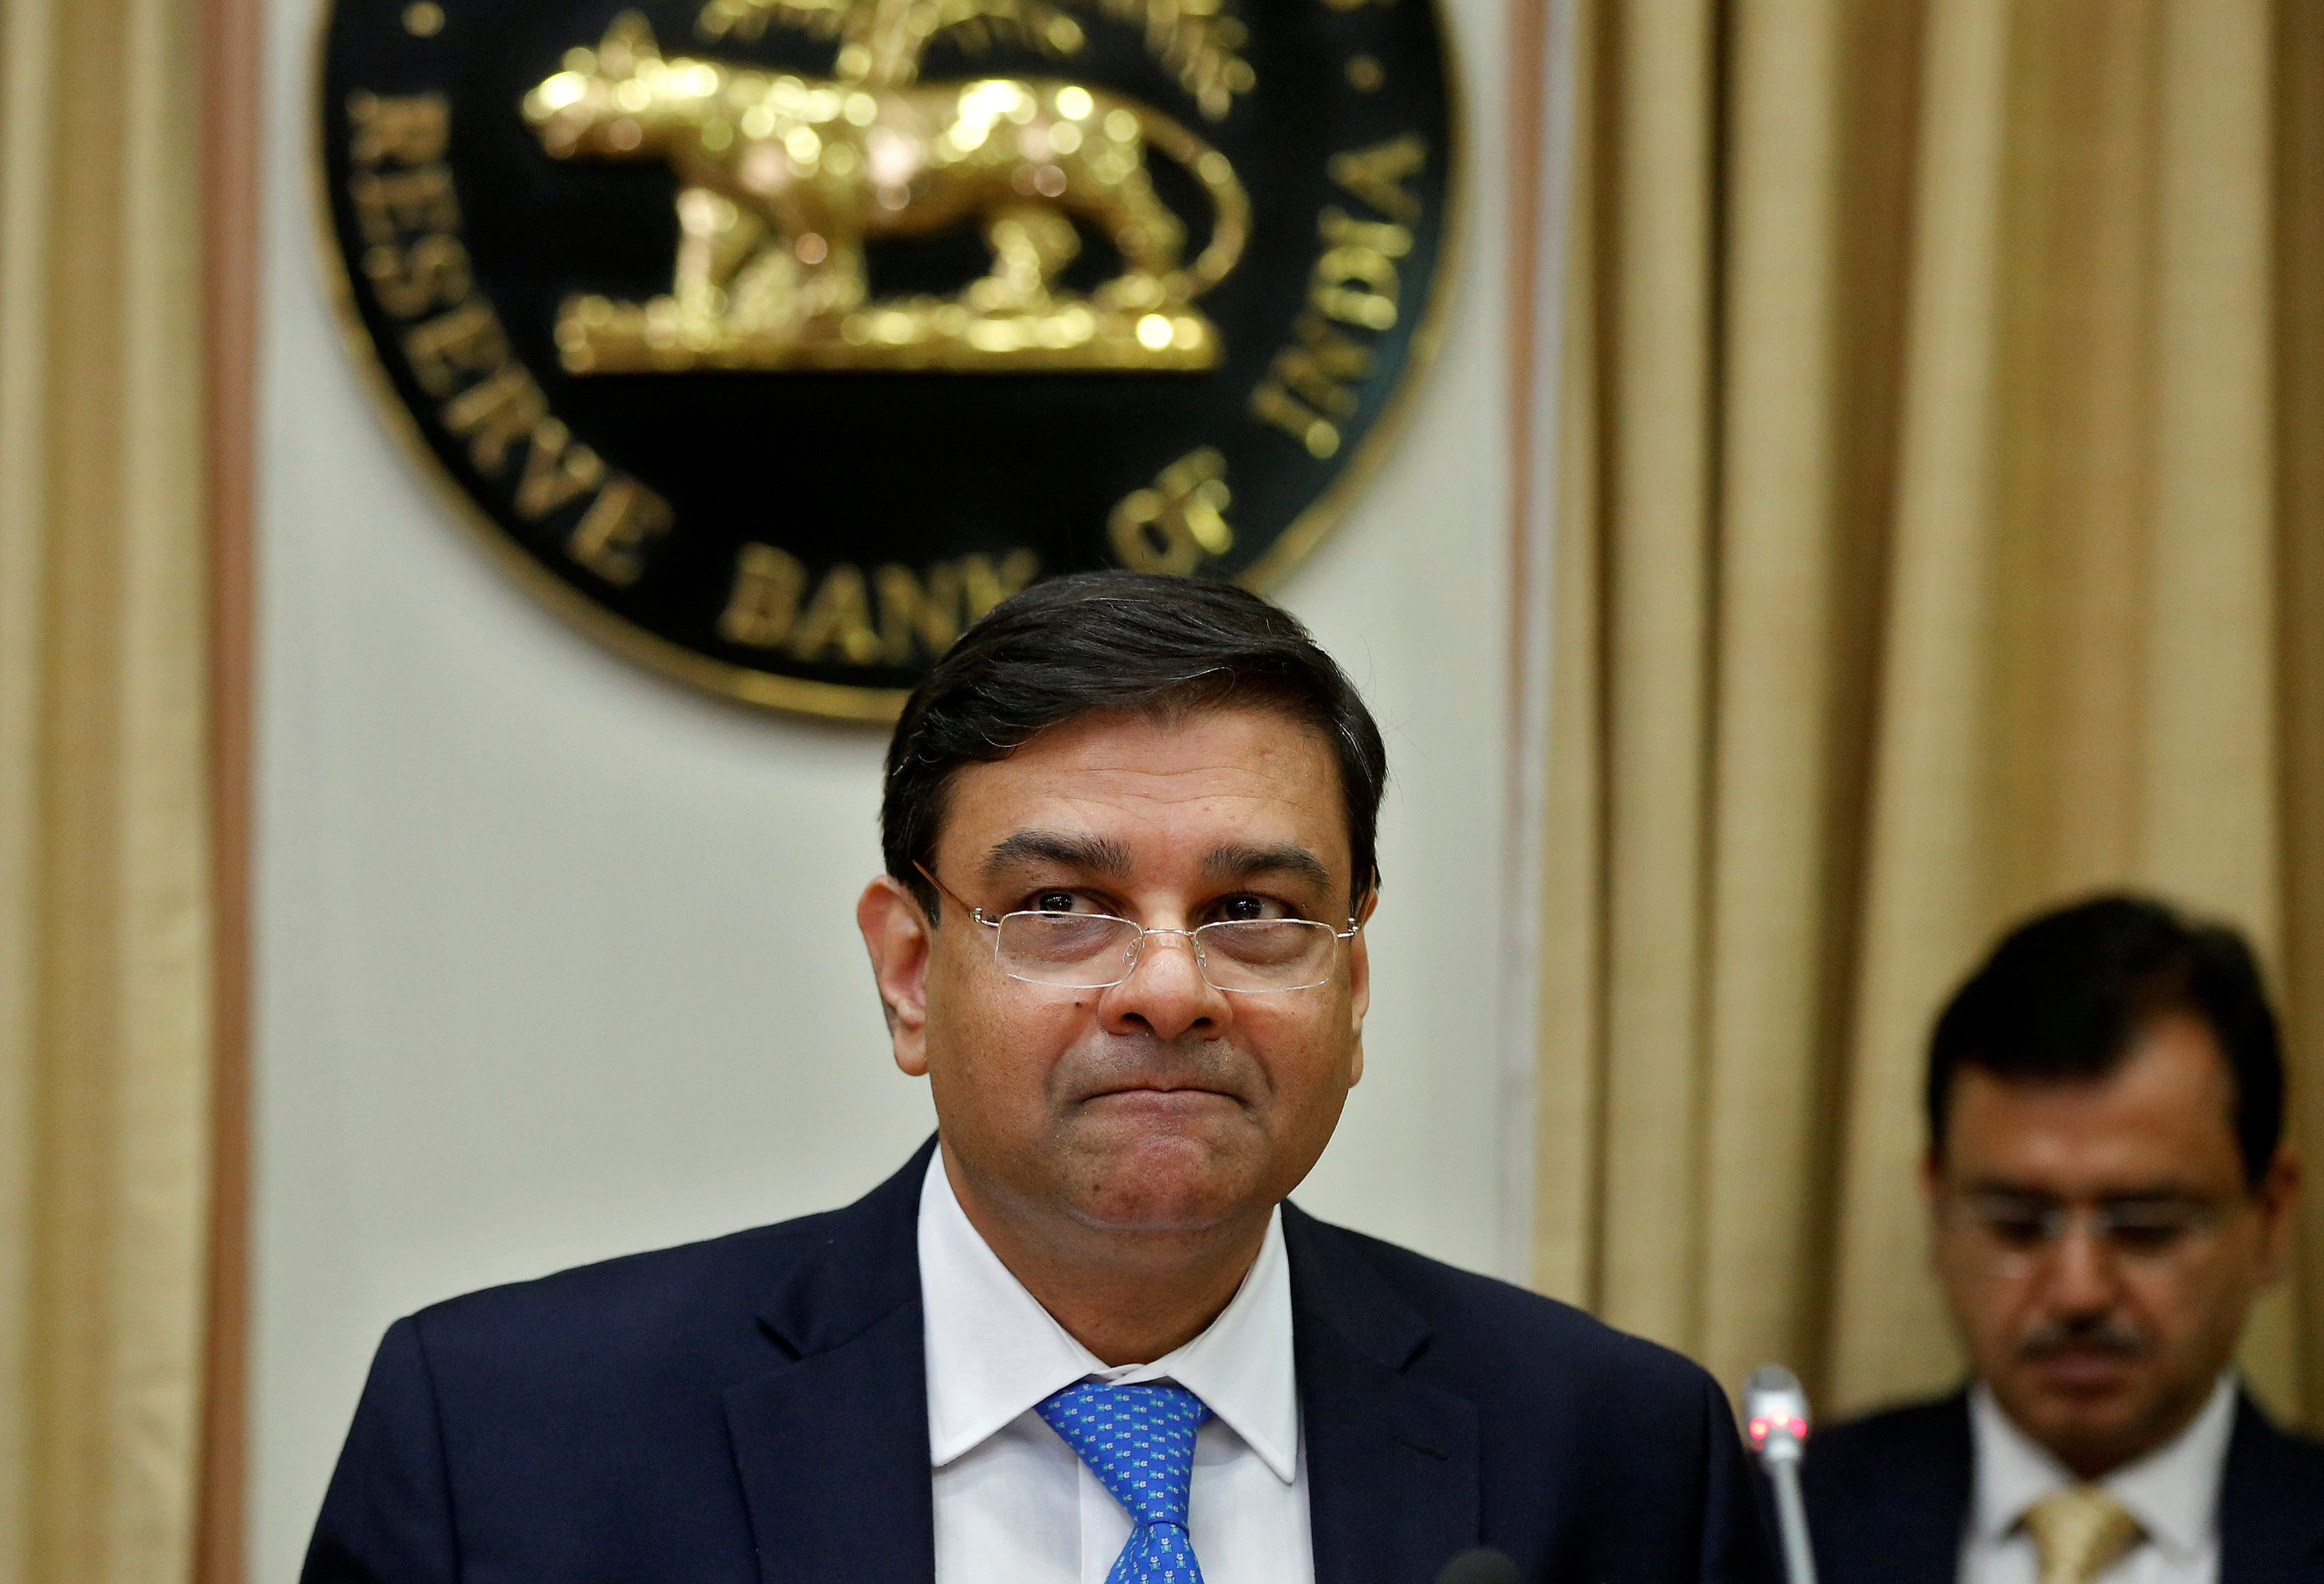 Loan waivers add to fiscal burden of states: India's central bank